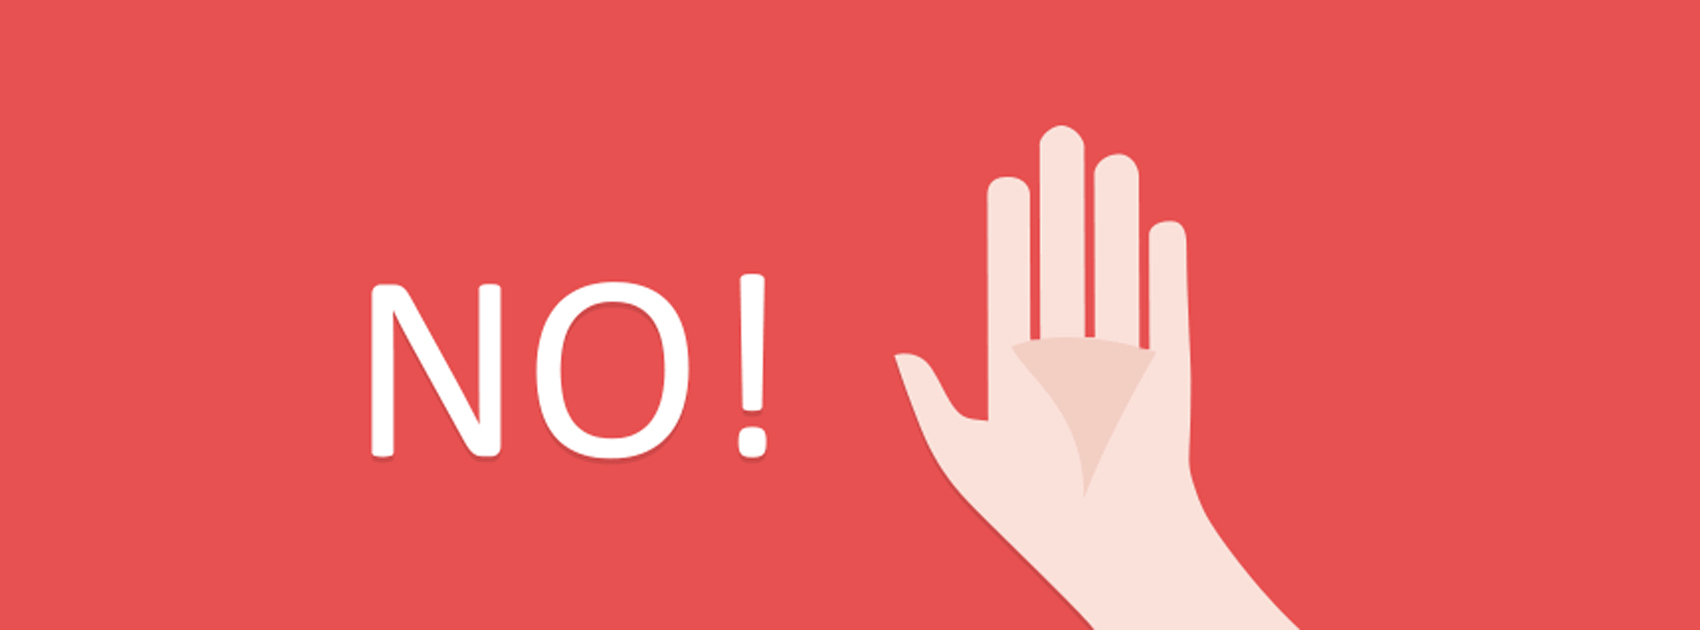 How To Say No To Clients,Startup Stories,Latest Business News 2019,Positive Ways to Say No,Dealing with Clients and Customers,Clients Experience,Potential New Clients,5 Ways To Say No To Clients,Saying No at Work,Workplace Tips 2019